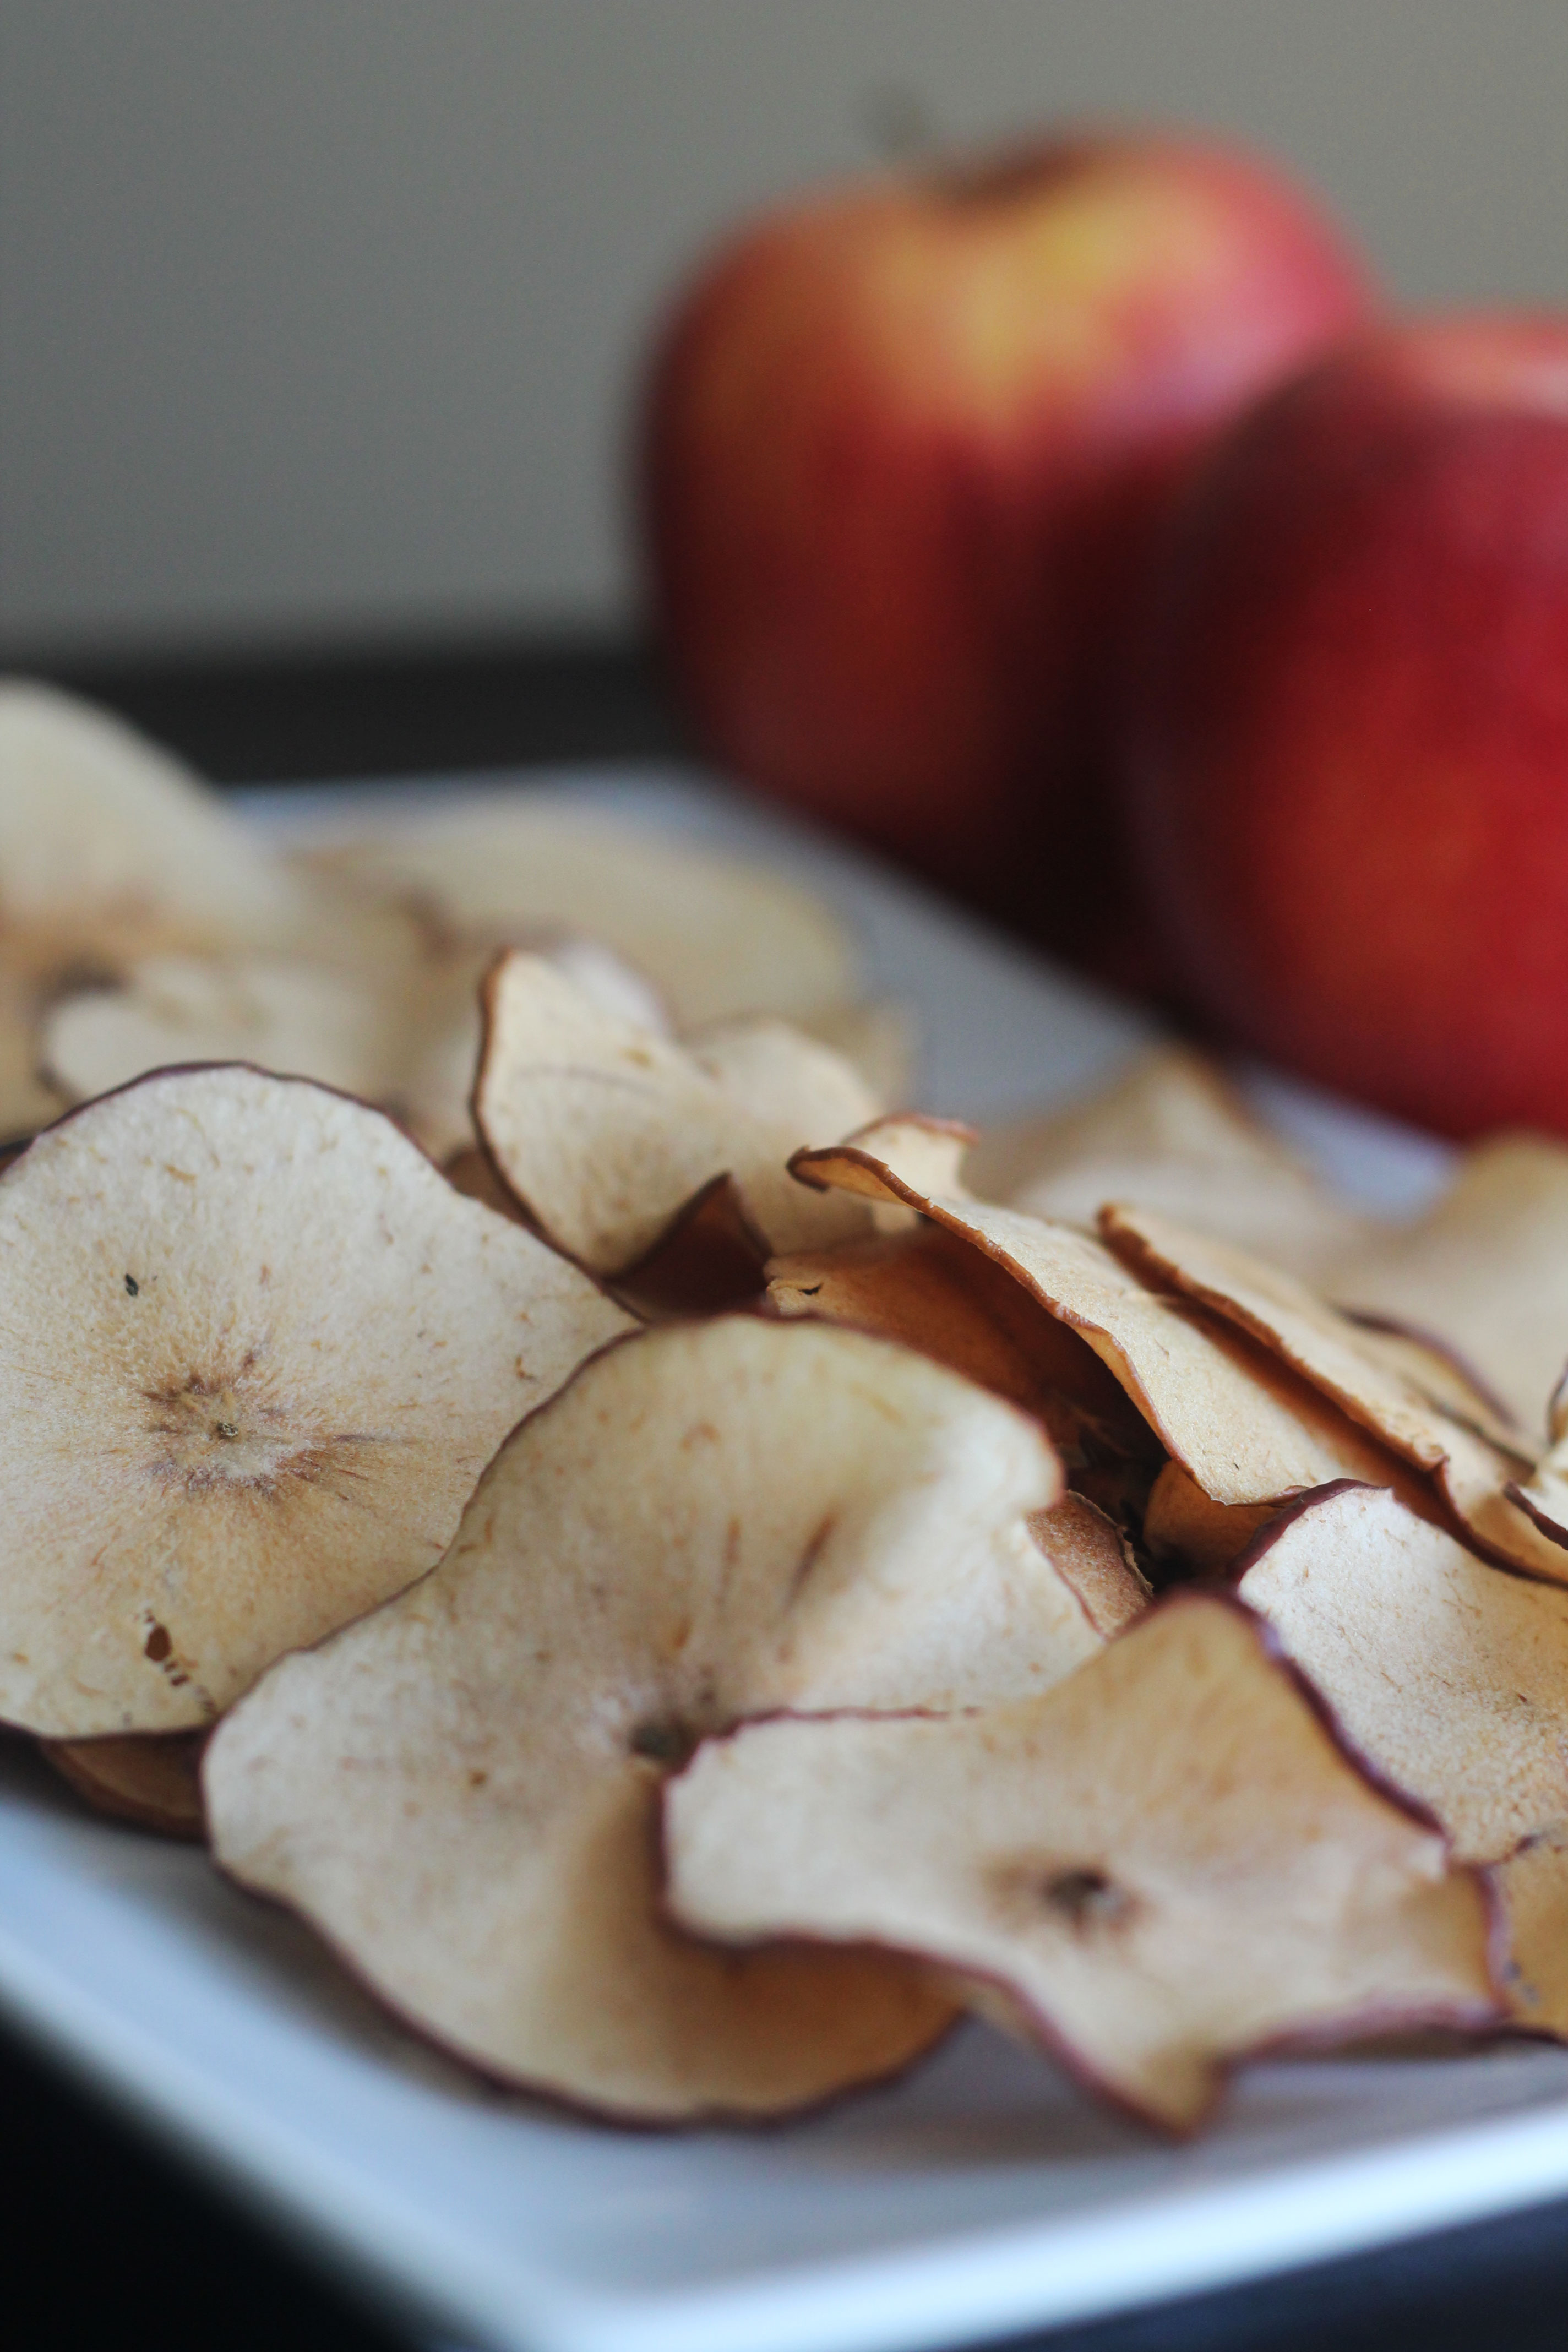 These Apple Chips could go in your oatmeal for breakfast, as a topping on a salad, an afternoon snack, or late night treat!